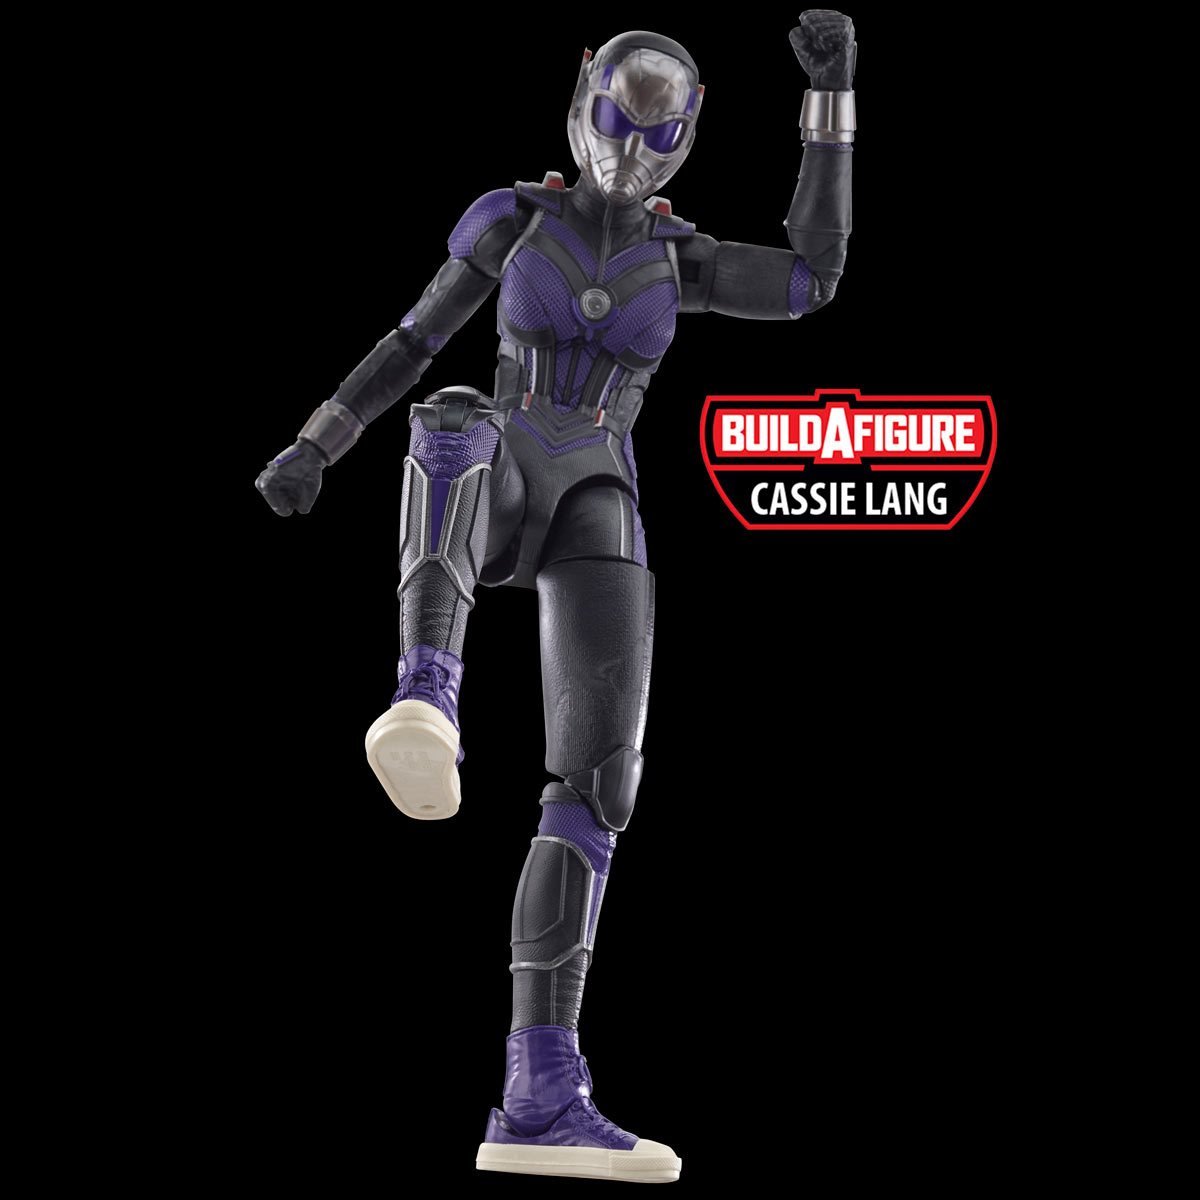 Marvel Legends Series Ant-Man,Ant-Man & The Wasp: Quantumania Collectible  6-Inch Action Figures, Ages 4 and Up